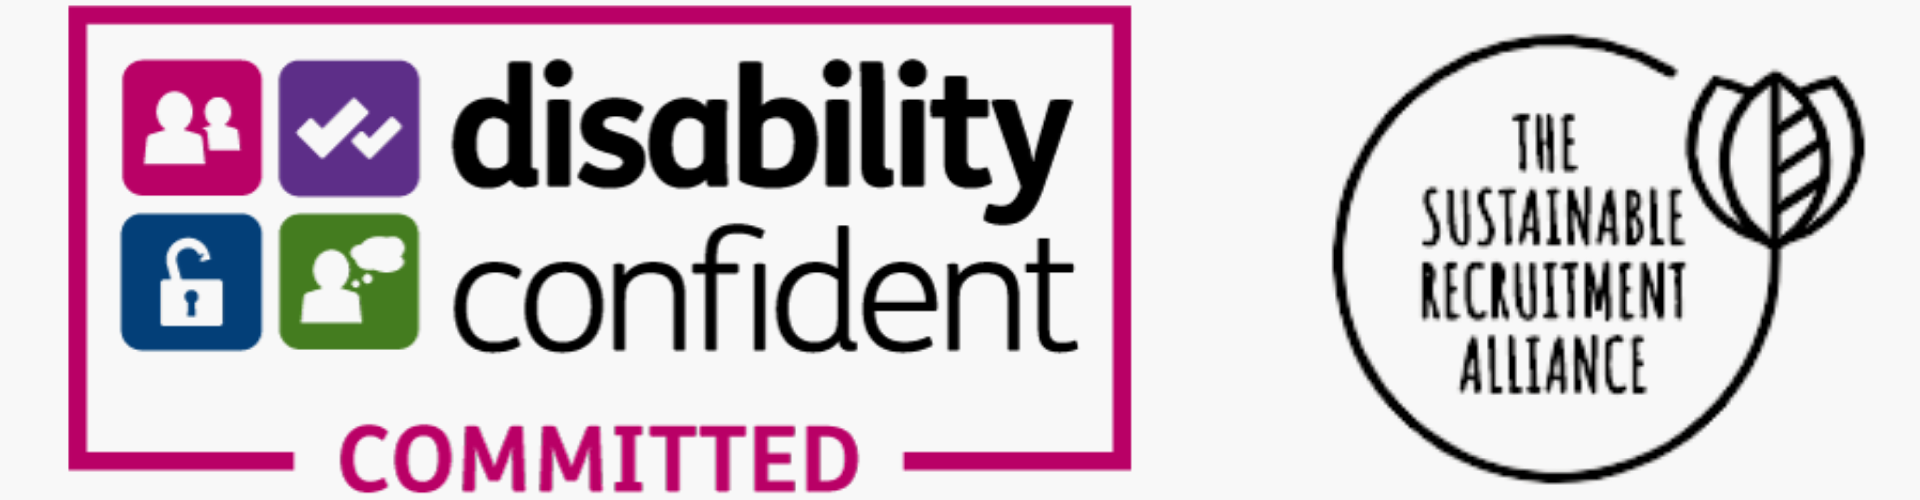 Disability Confident Committed and Sustainable Recruitment Alliance badges